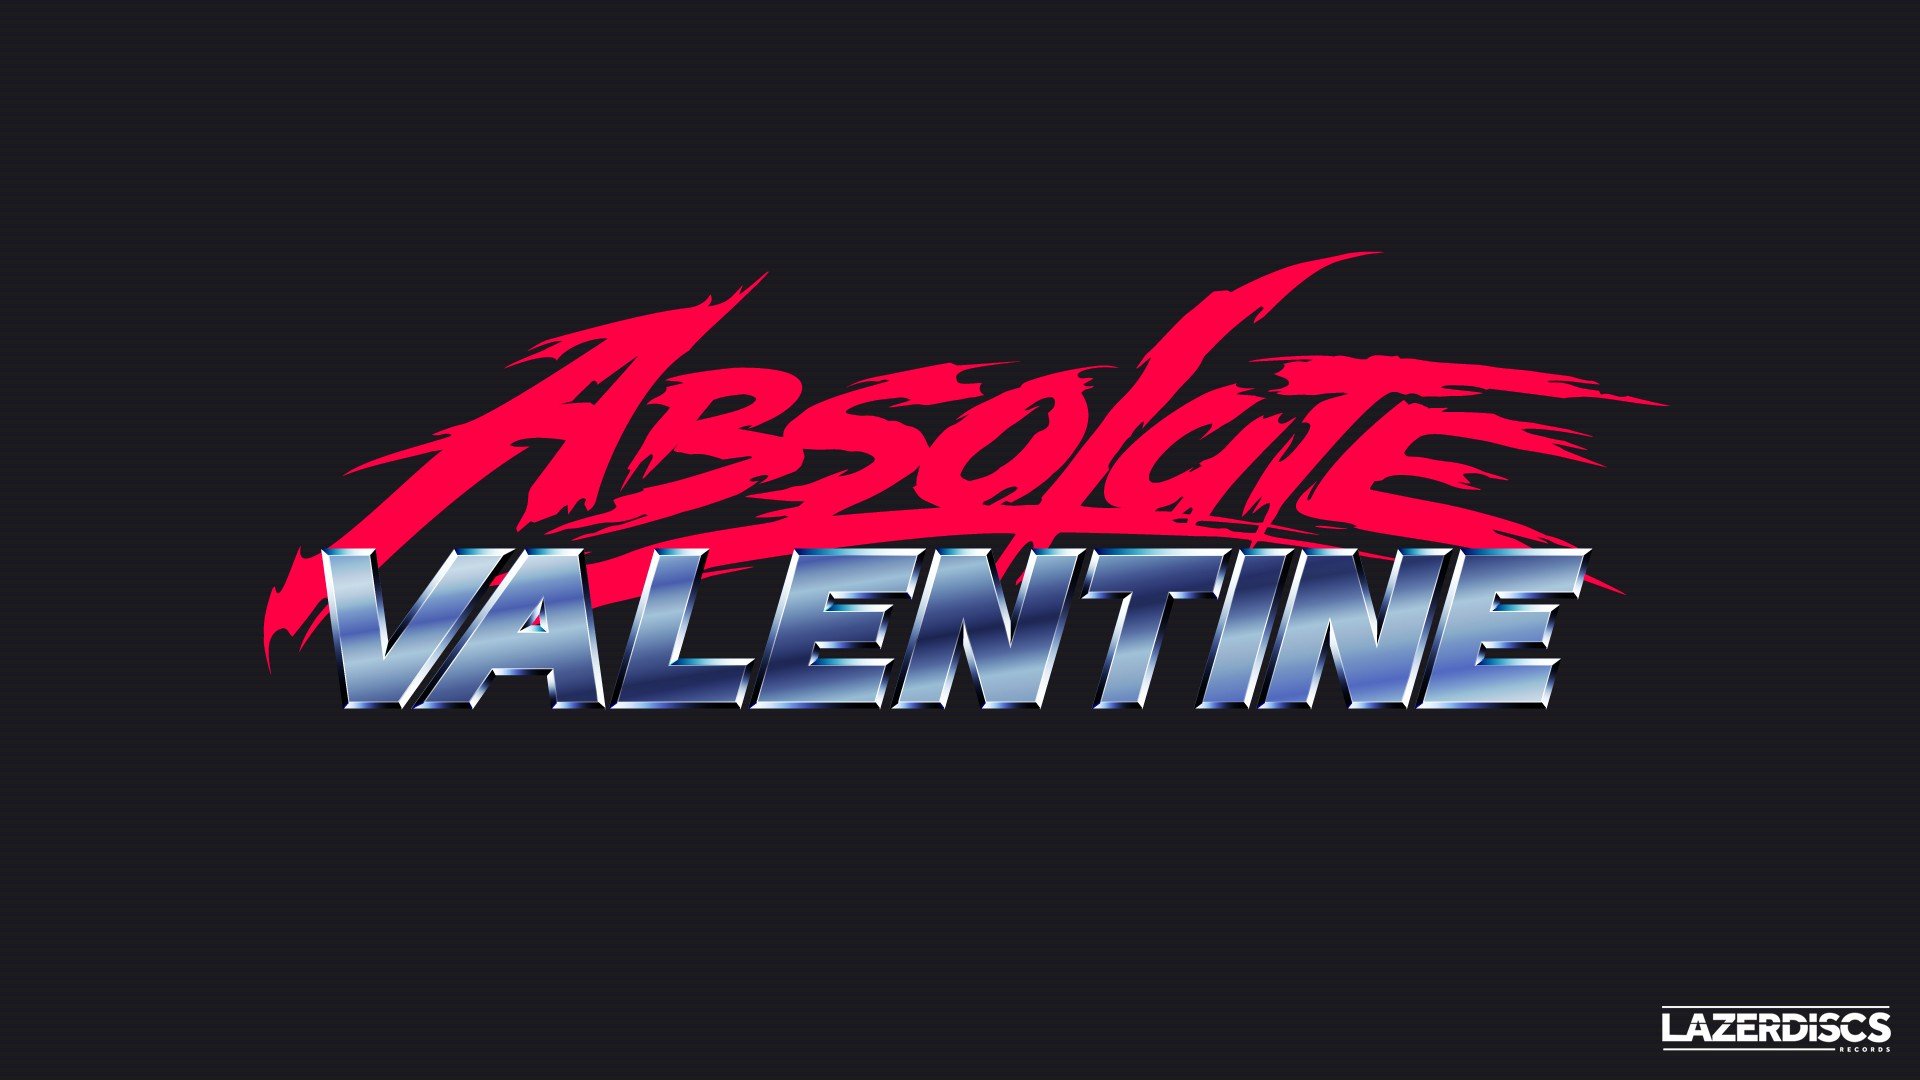 absolute valentine, Synthwave, 1980s, Text, New Retro Wave, Logo, Neon